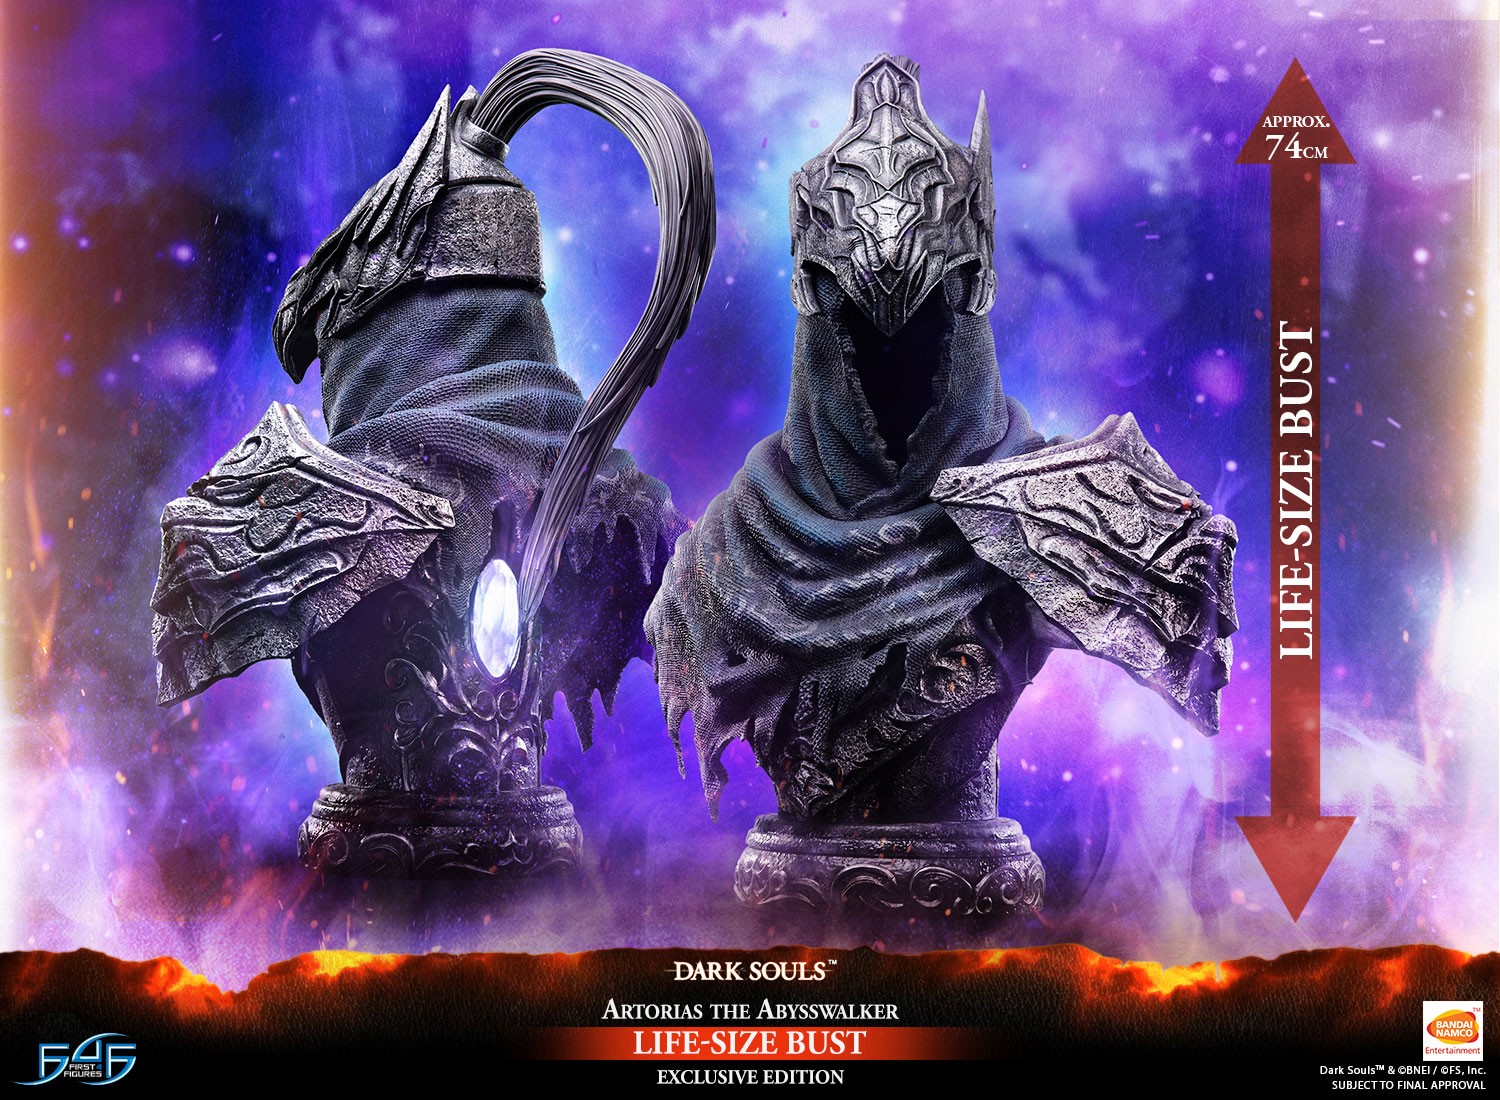 Dark Souls – Artorias the Abysswalker Life-Size Bust Exclusive Edition